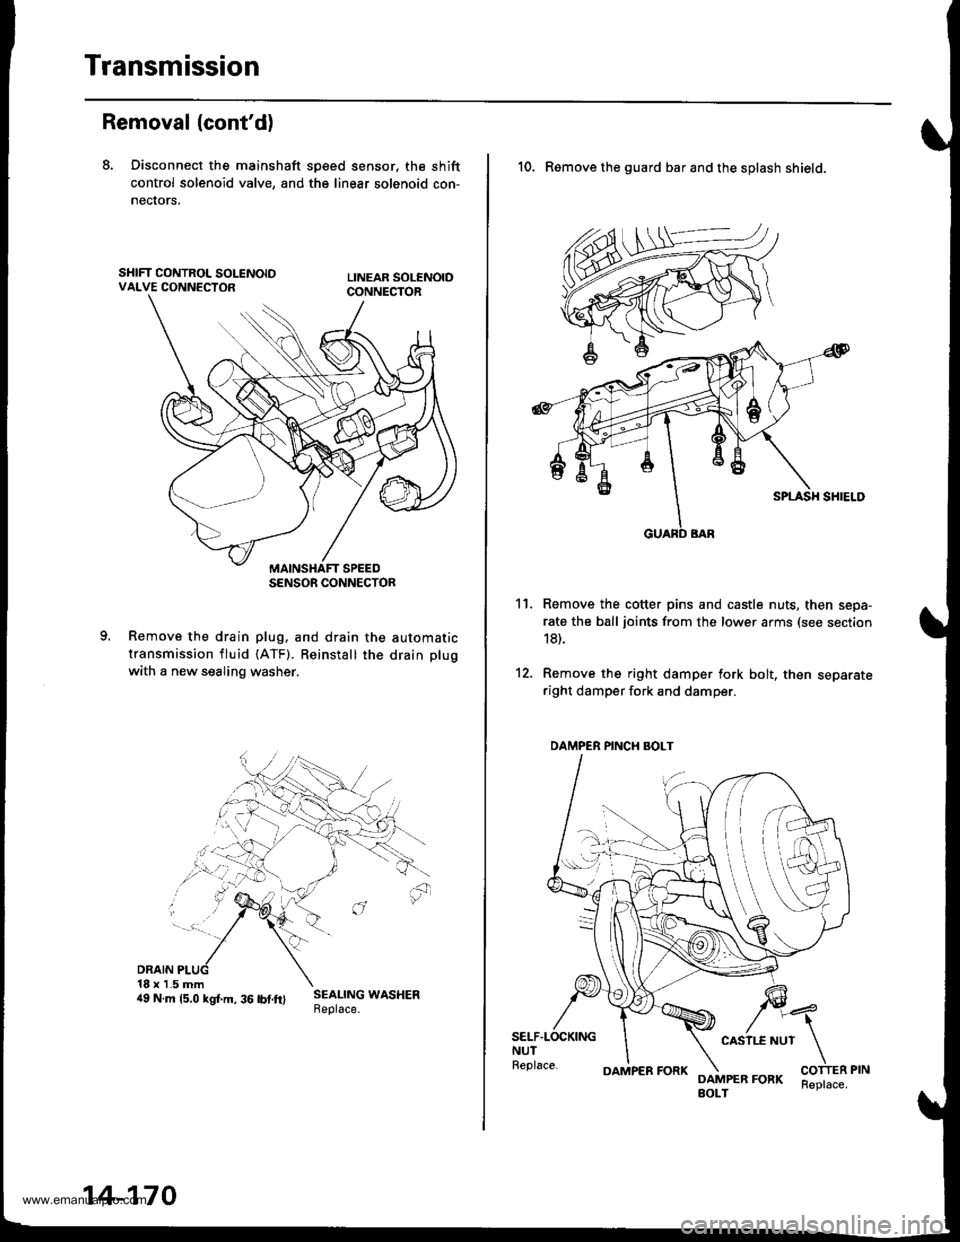 HONDA CR-V 1998 RD1-RD3 / 1.G Owners Guide 
Transmission
Removal (contd)
8. Disconnect the mainshaft sp€ed sensor, the shift
control solenoid valve, and the linear solenoid con-
necrors,
Remove the drain plug. and drain the automatic
transm